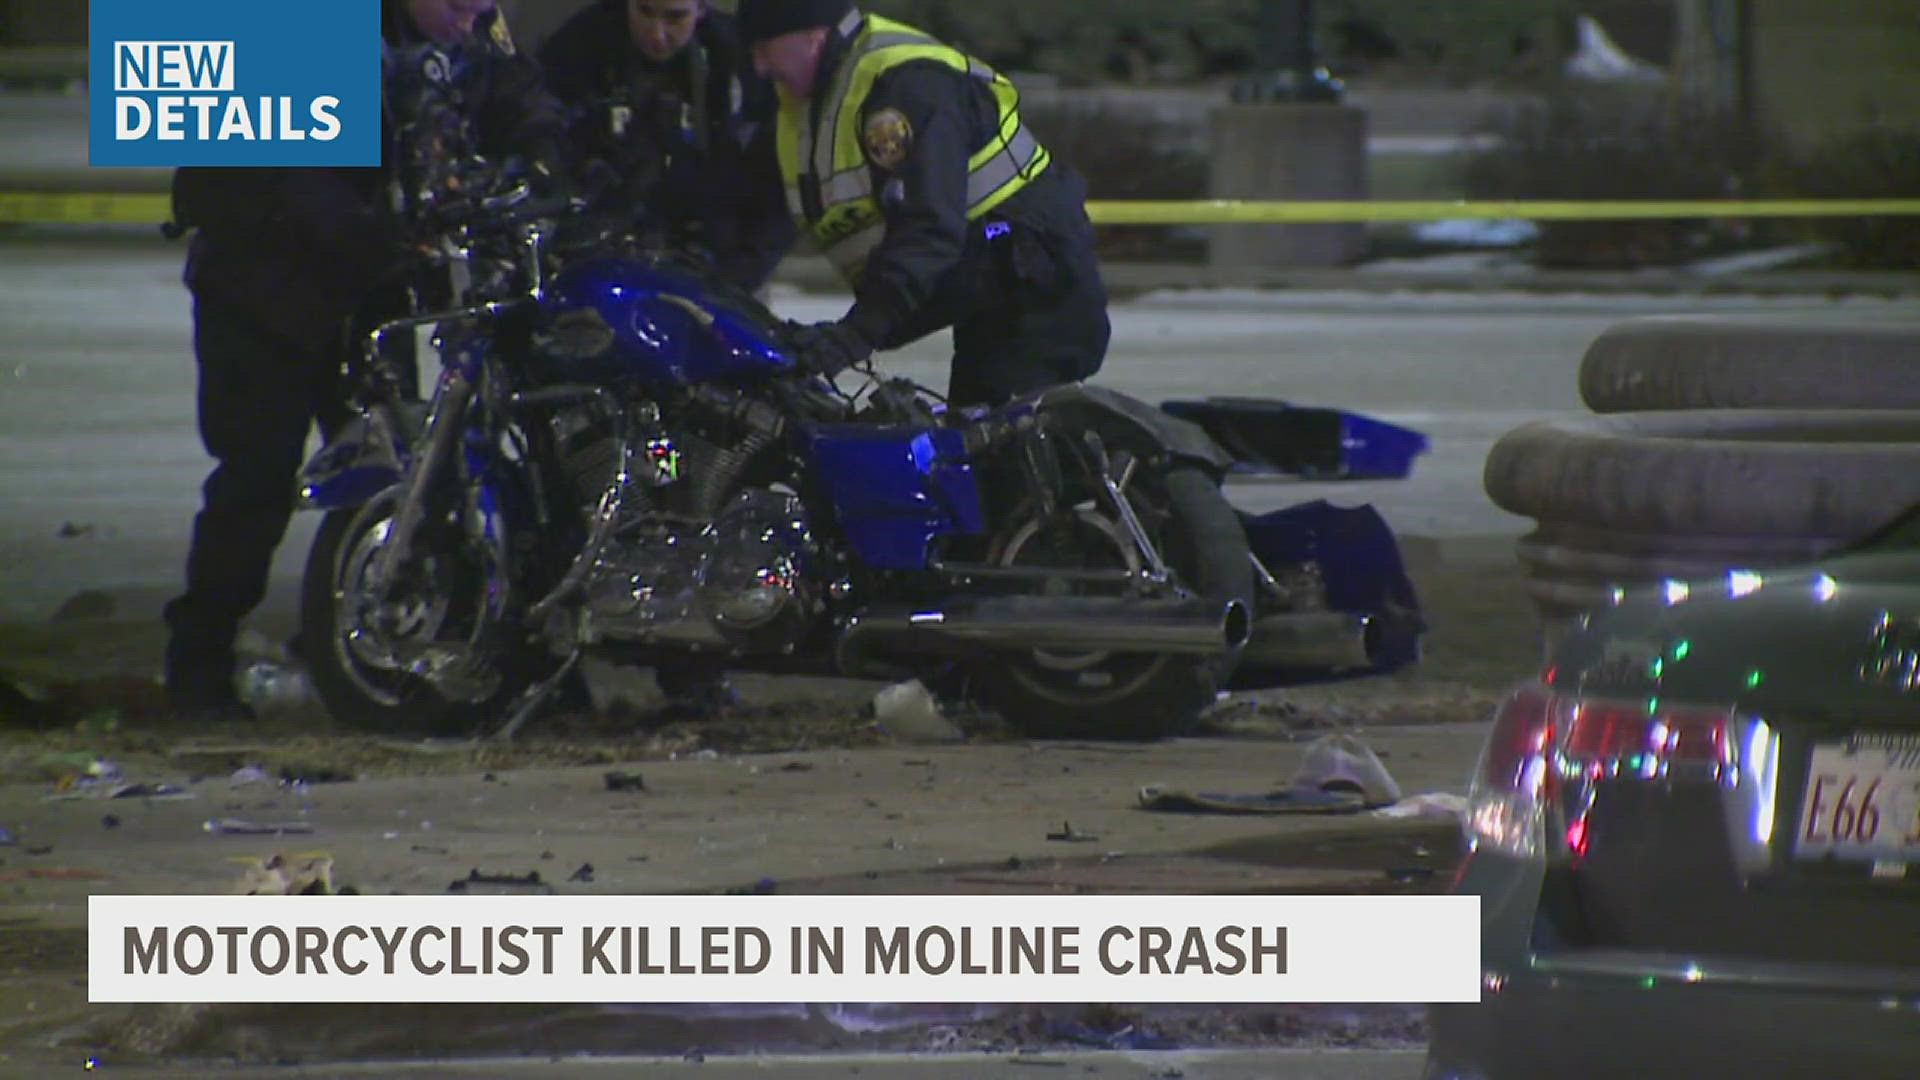 Police say the motorcyclist died in the hospital after crashing into a turning car in the middle of the 17th Street and River Drive intersection in Moline.